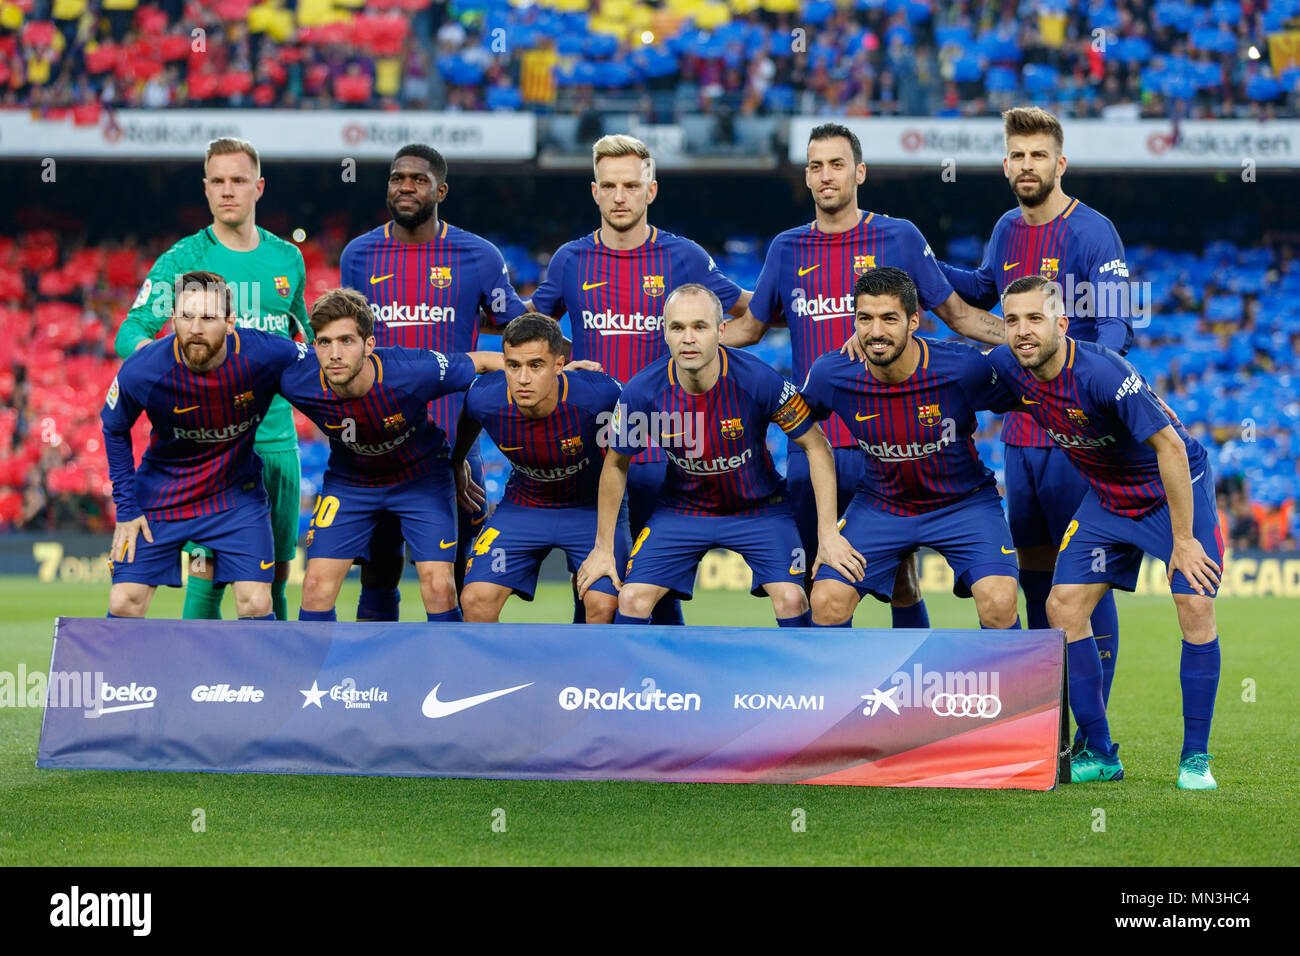 Barcelona, 6th May: Photo of FC Barcelona team during the 2017/2018 LaLiga Santander Round 36 game between FC Barcelona and Real Madrid at Camp Nou on Stock Photo